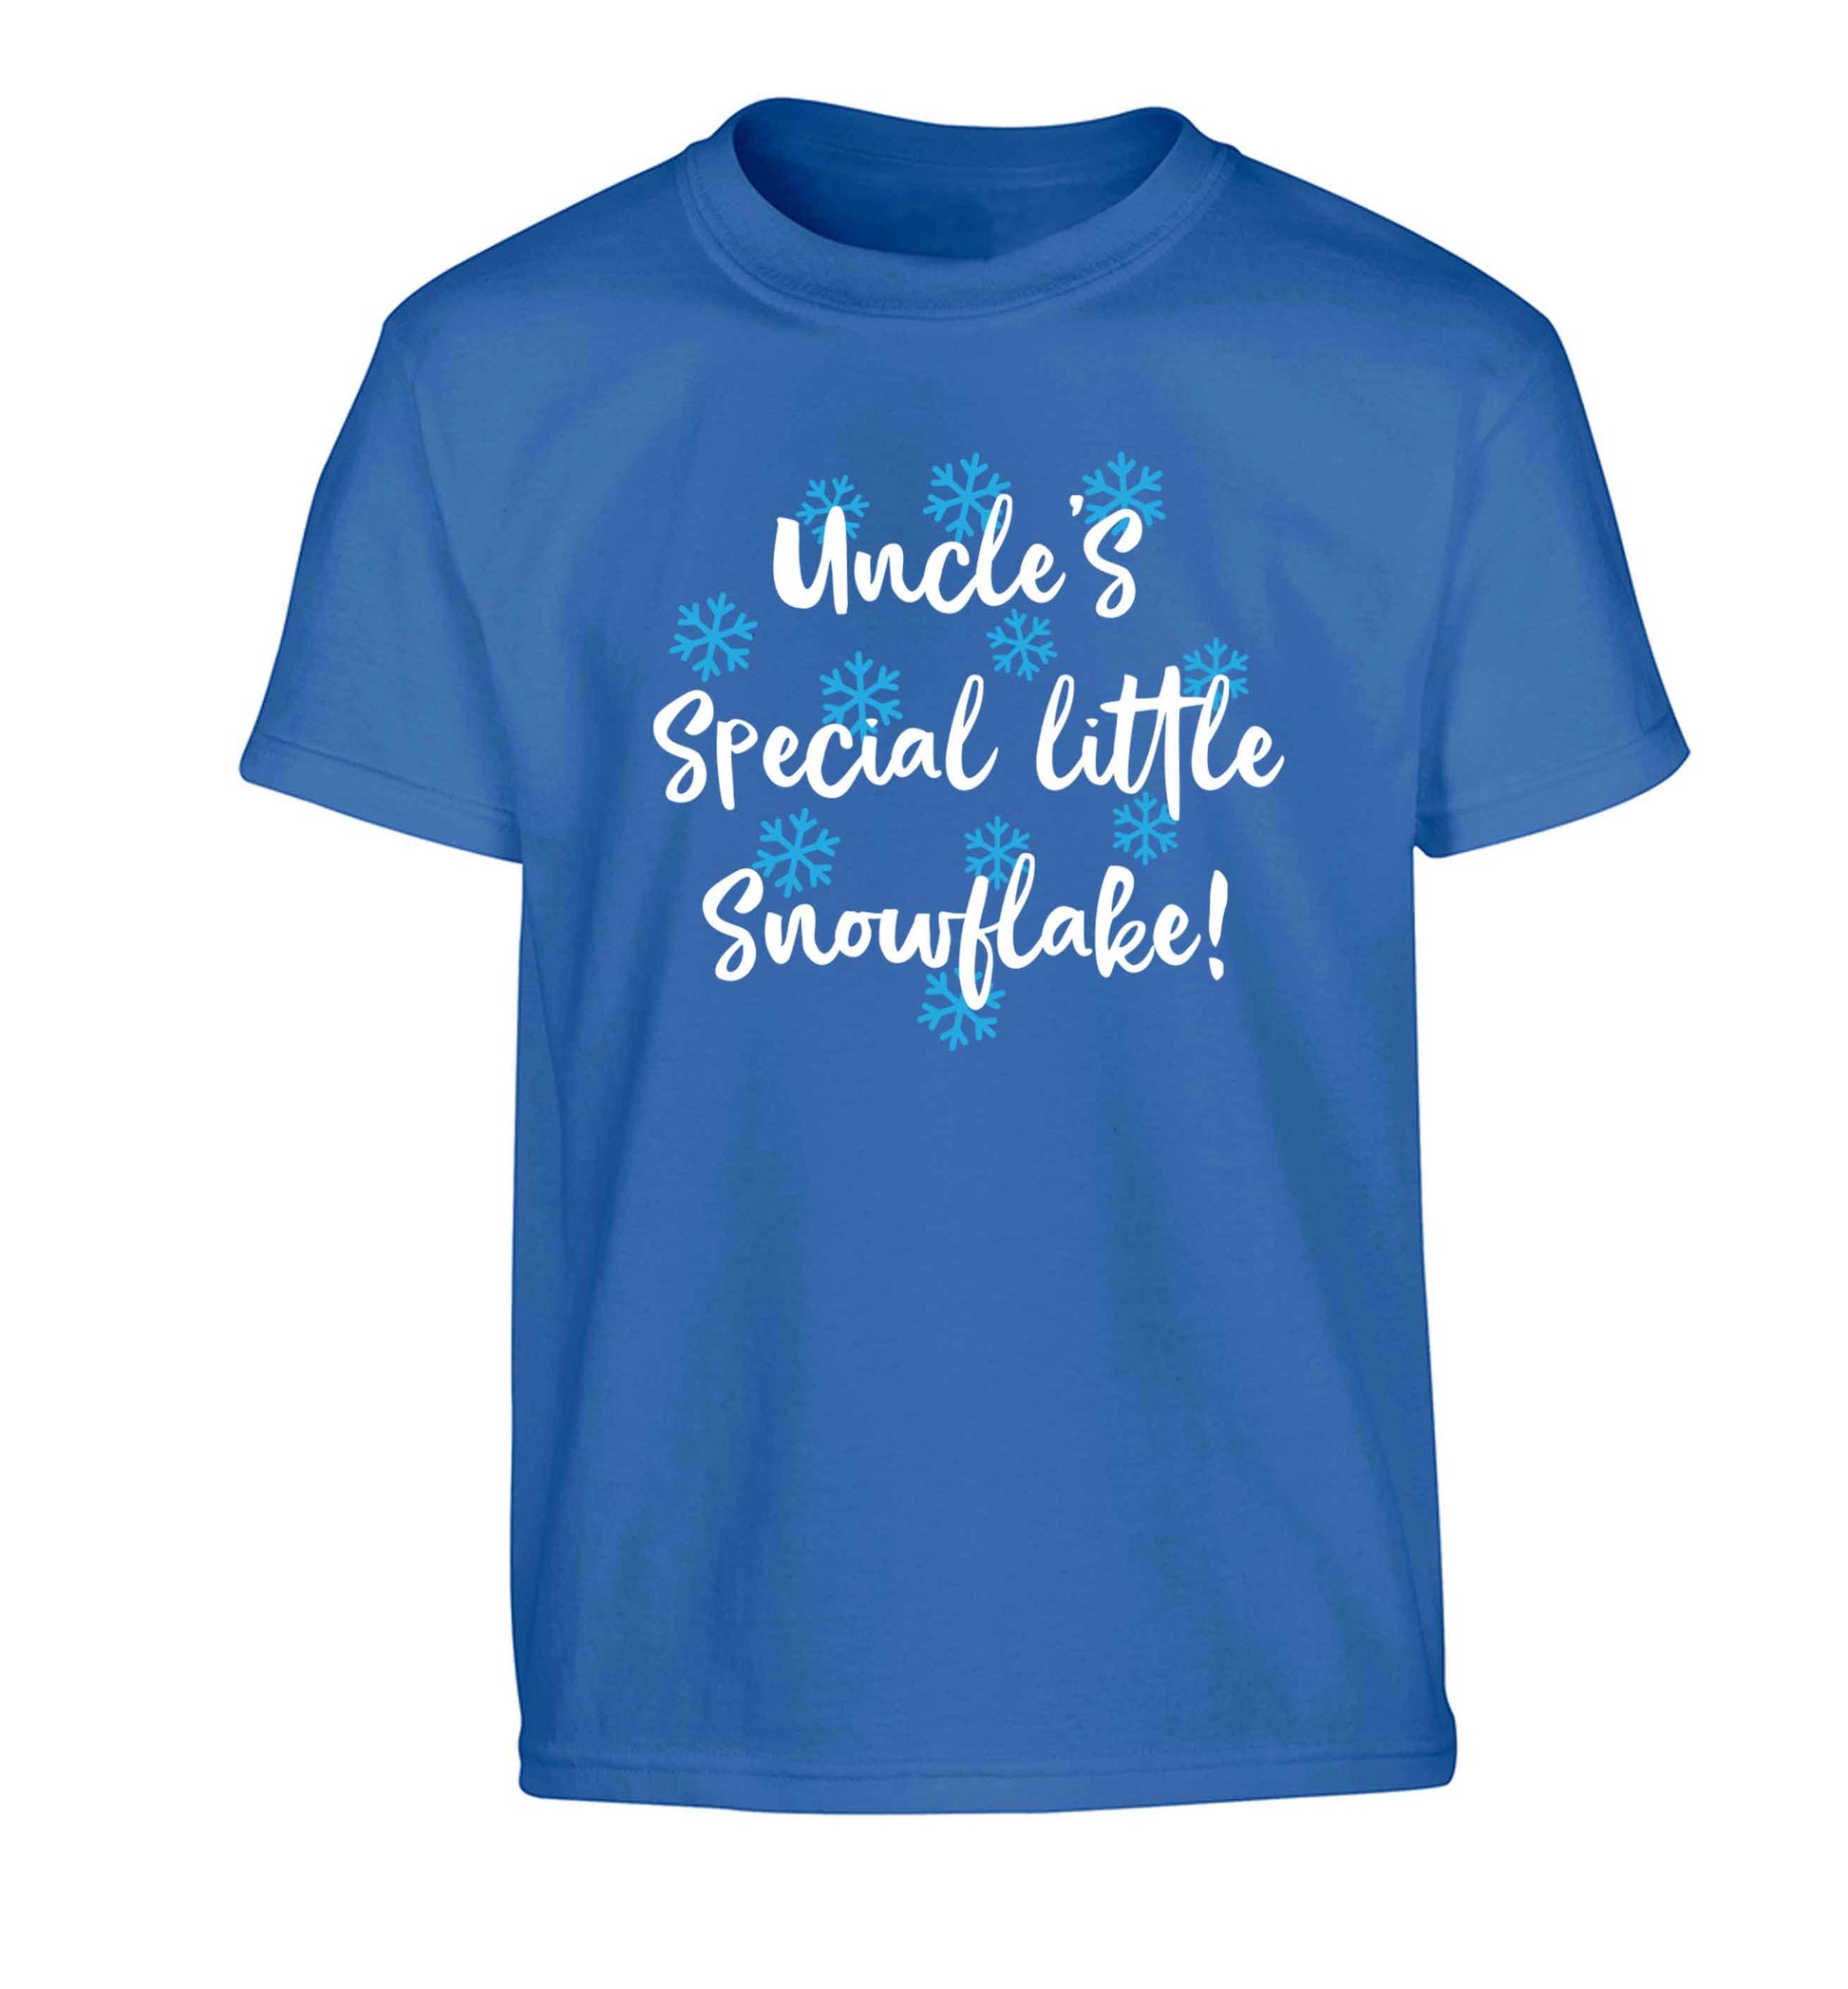 Uncle's special little snowflake Children's blue Tshirt 12-13 Years